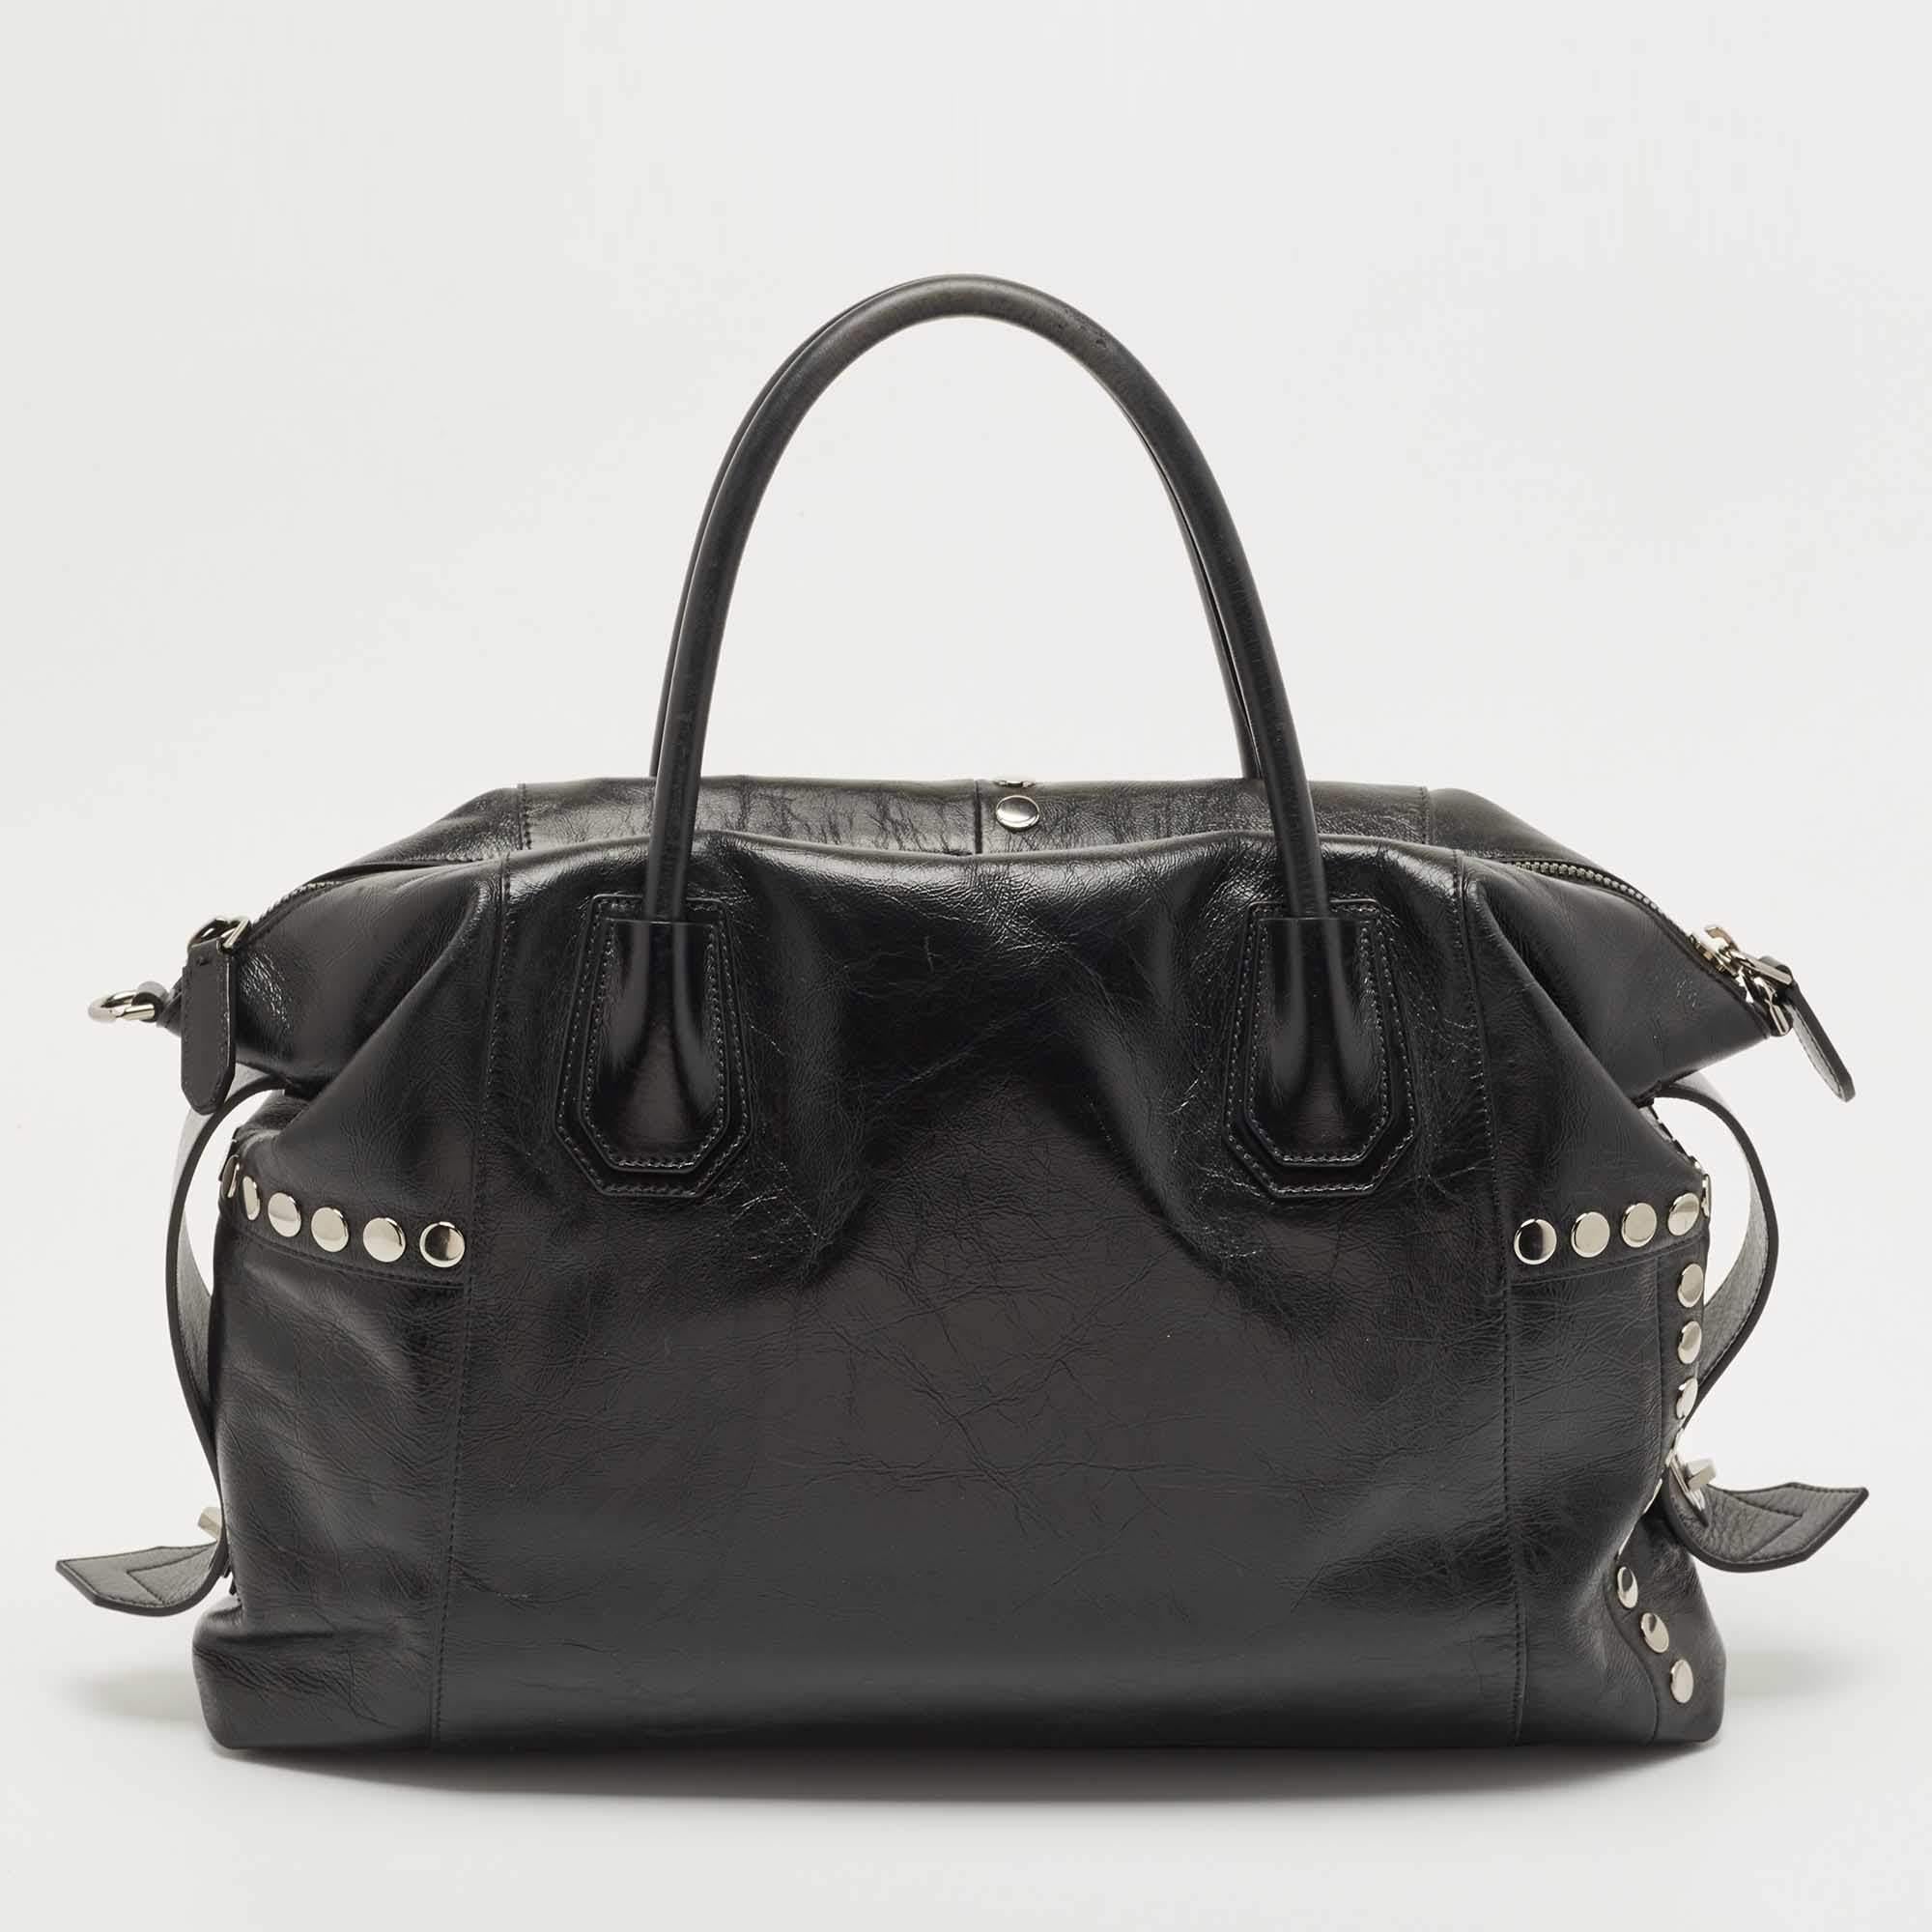 Stylish and easy to carry, this designer leather satchel will be a fine choice for work or after. Lined with canvas, this pre-owned Givenchy bag can easily fit all your essentials. It can be held in your arm or hand using the two handles.

